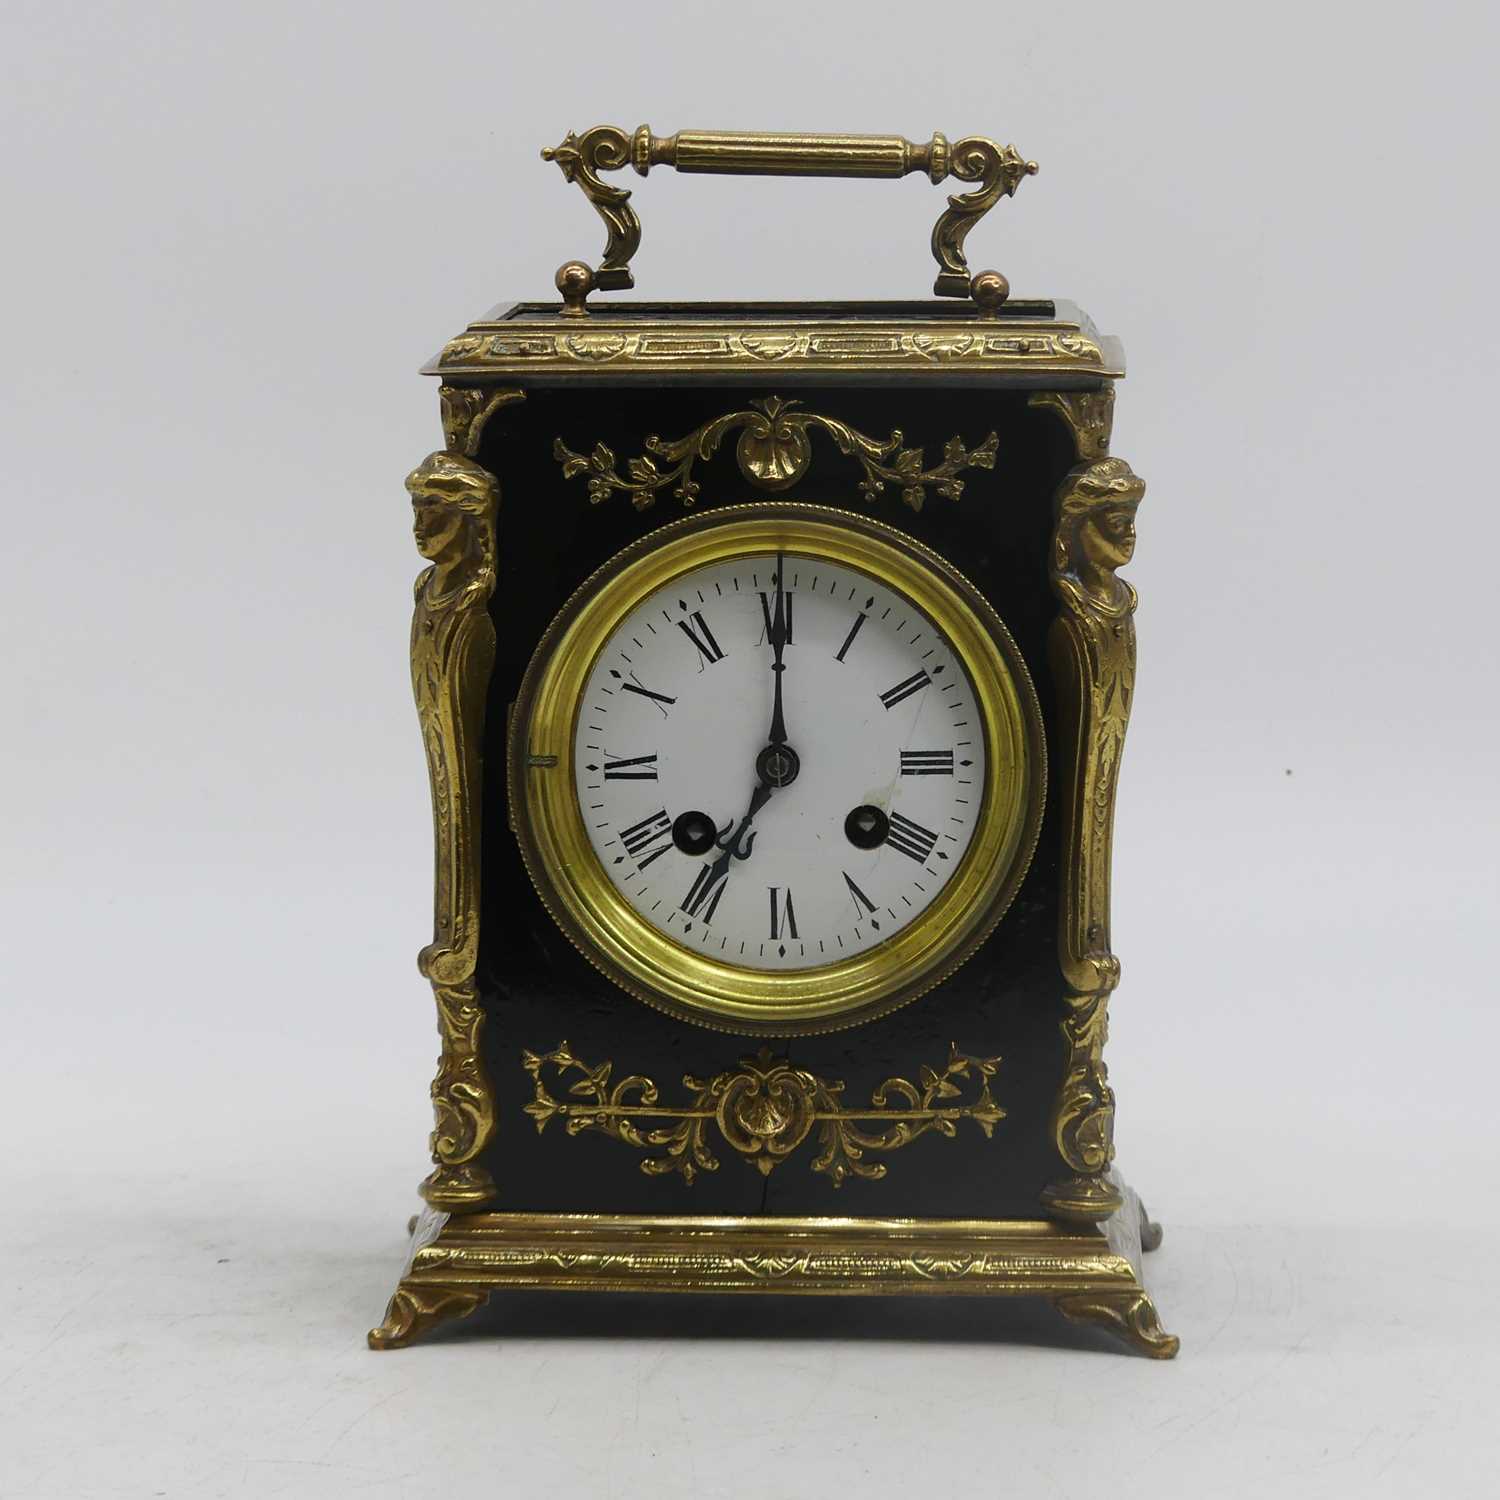 A 19th century French mantel clock, the enamel dial showing Roman numerals, the 8-day movement